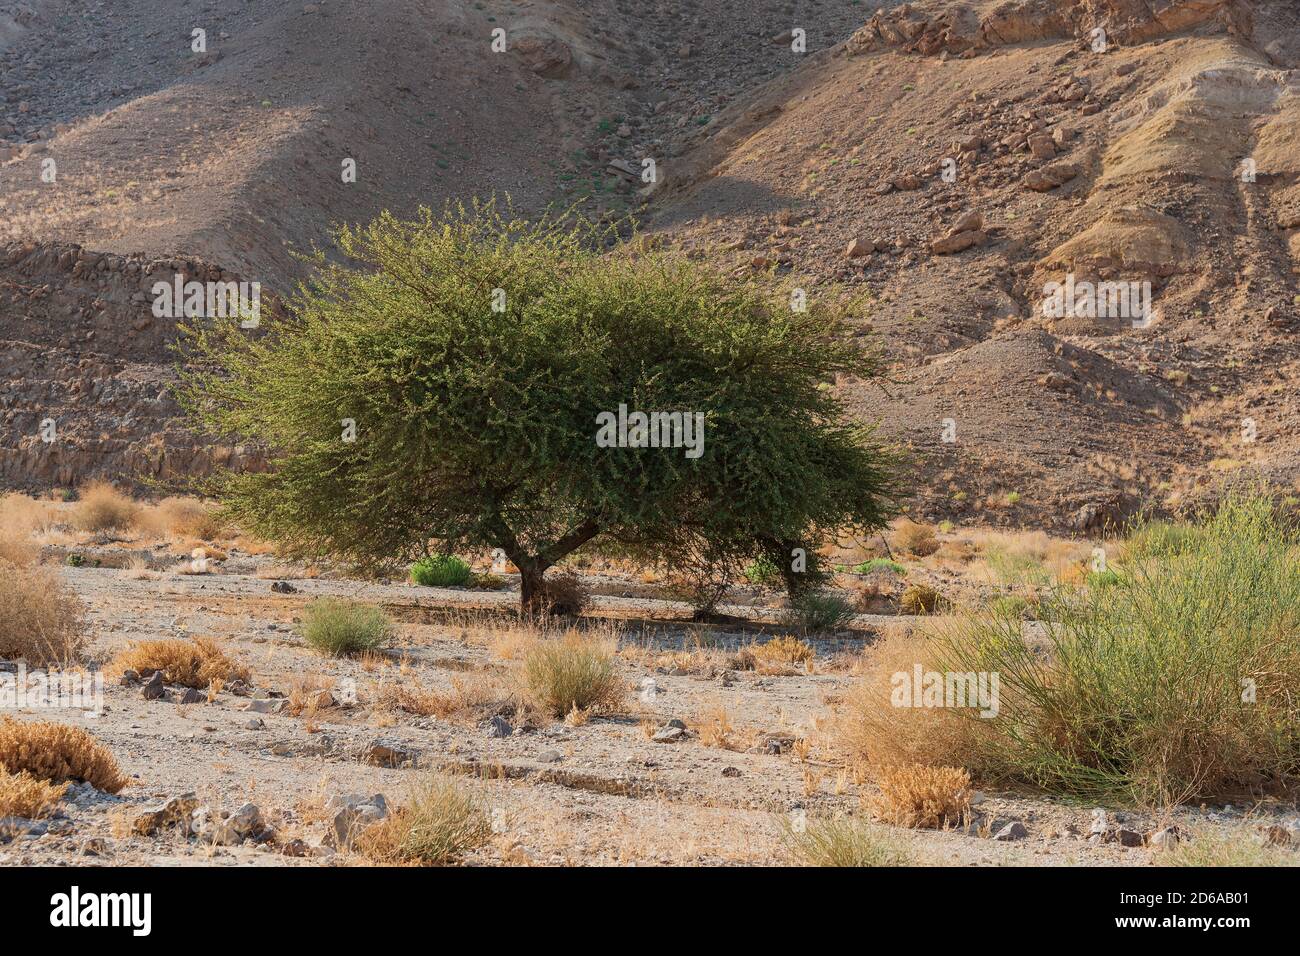 amazing specimen of acacia raddiana spiraled acacia in nahal gevanim in the makhtesh ramon crater in israel at the height of summer Stock Photo